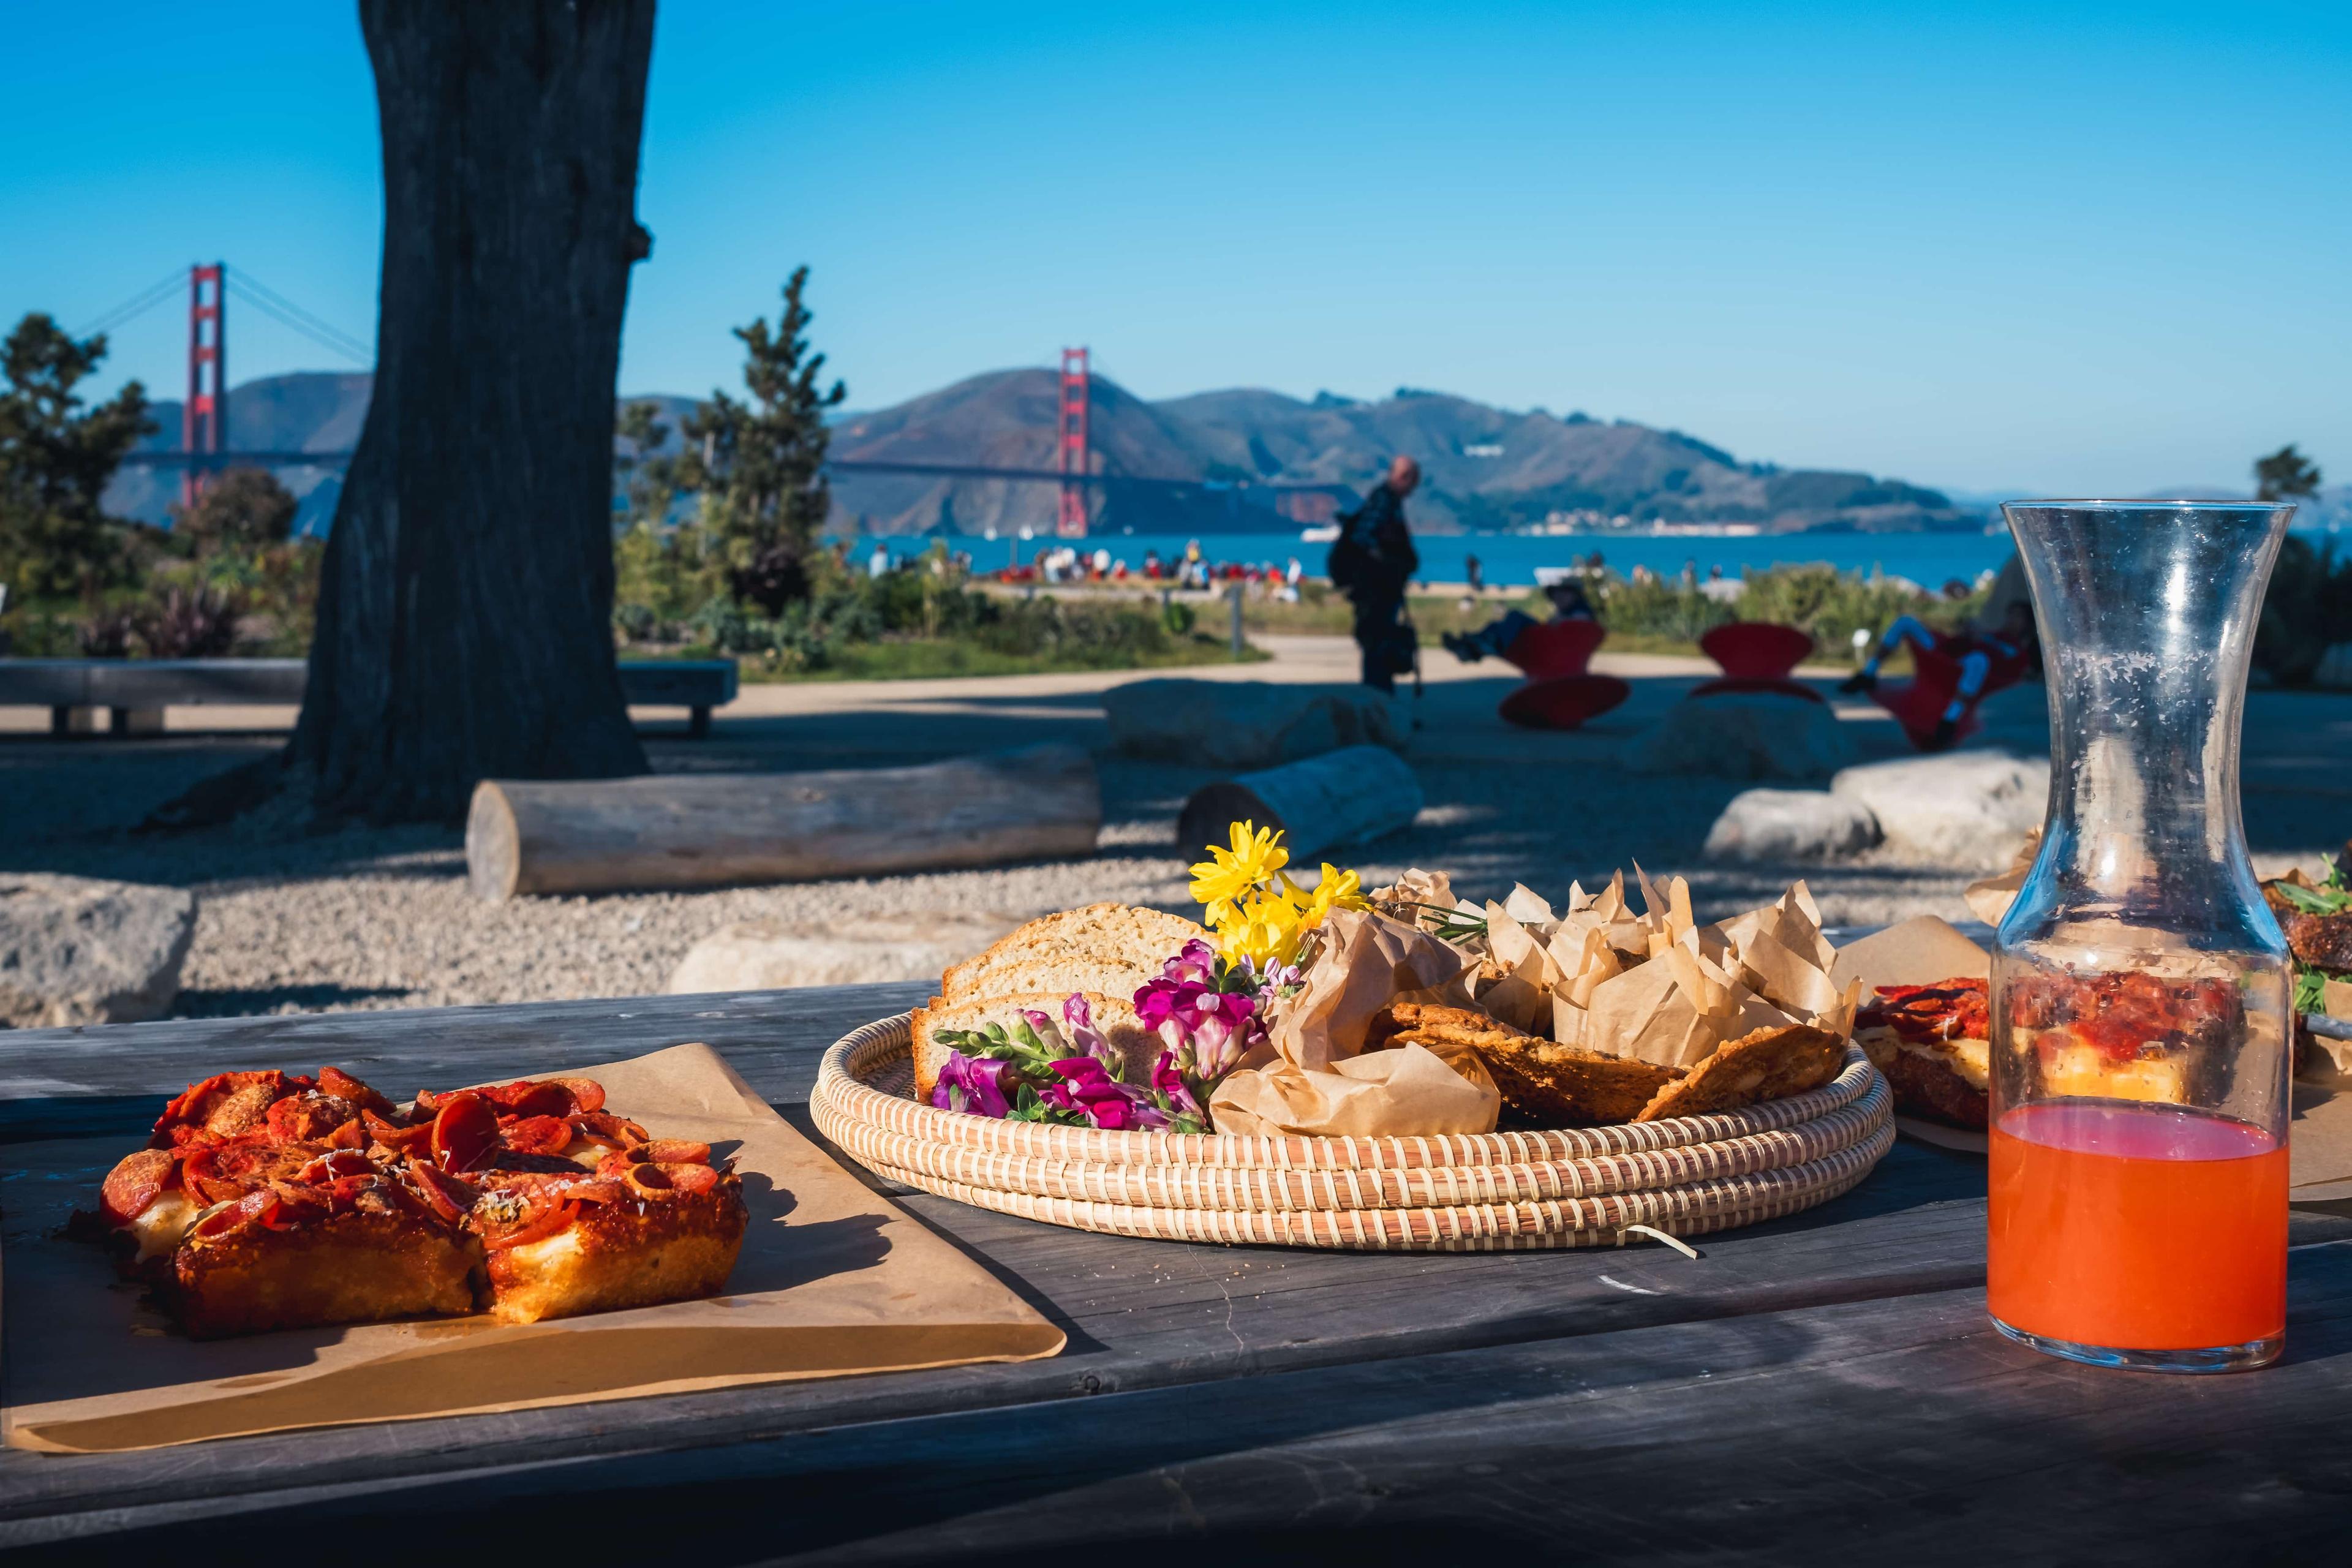 Picnic food platter with pizza and bread in the foreground and Presidio Tunnel Tops and the Golden Gate Bridge in the background.